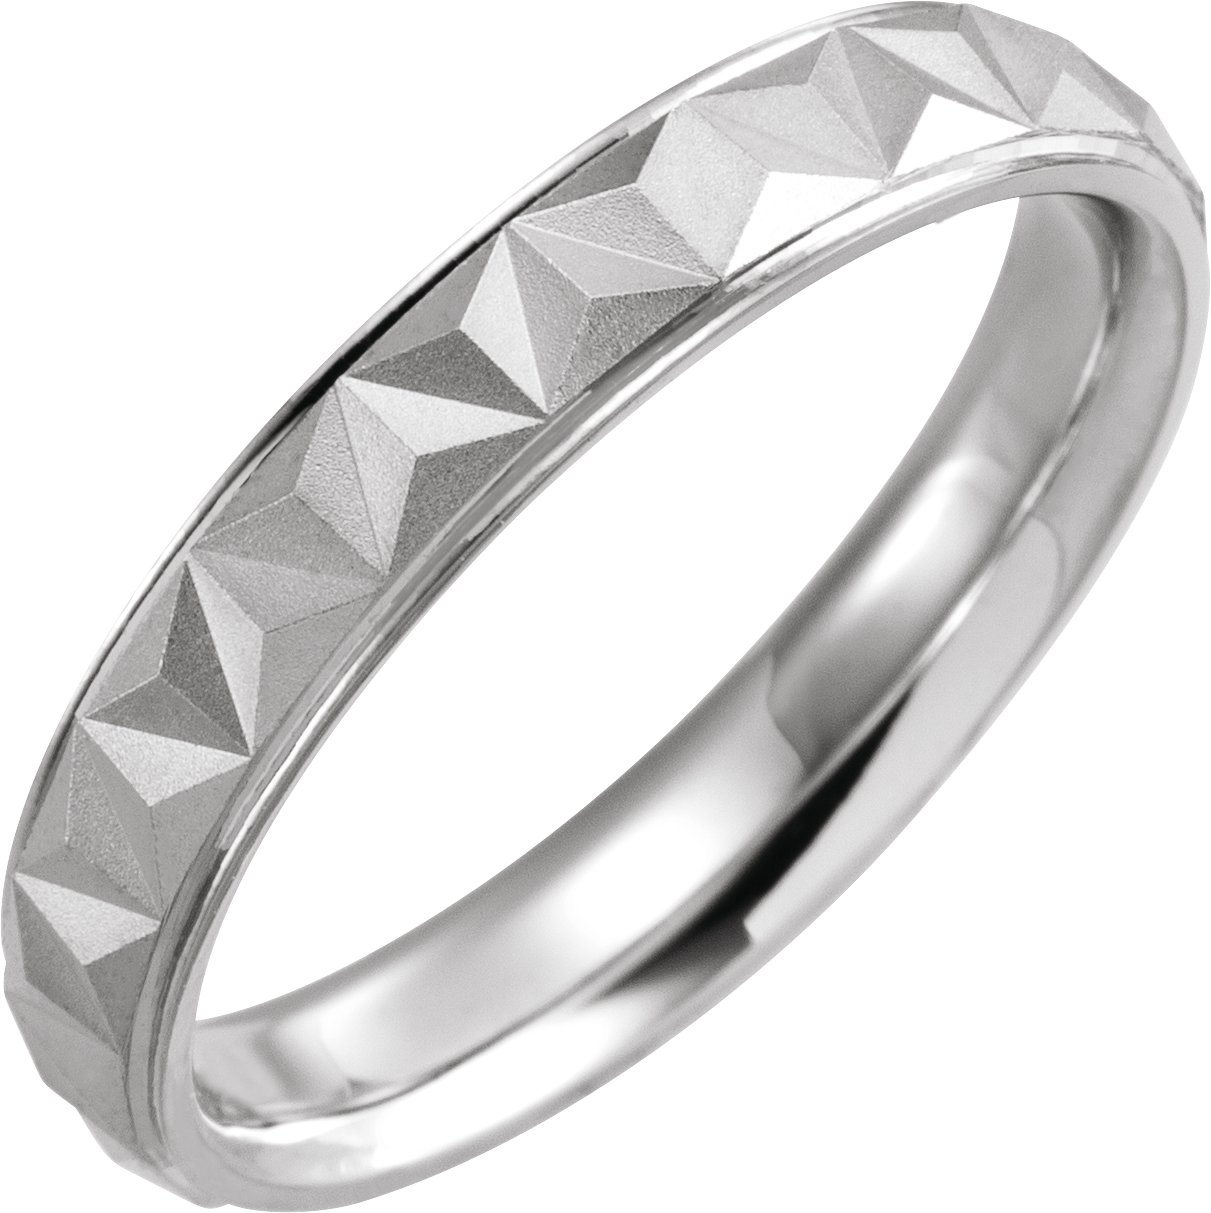 Continuum Sterling Silver 4 mm Geometric Band with Matte/Polished Finish Size 15